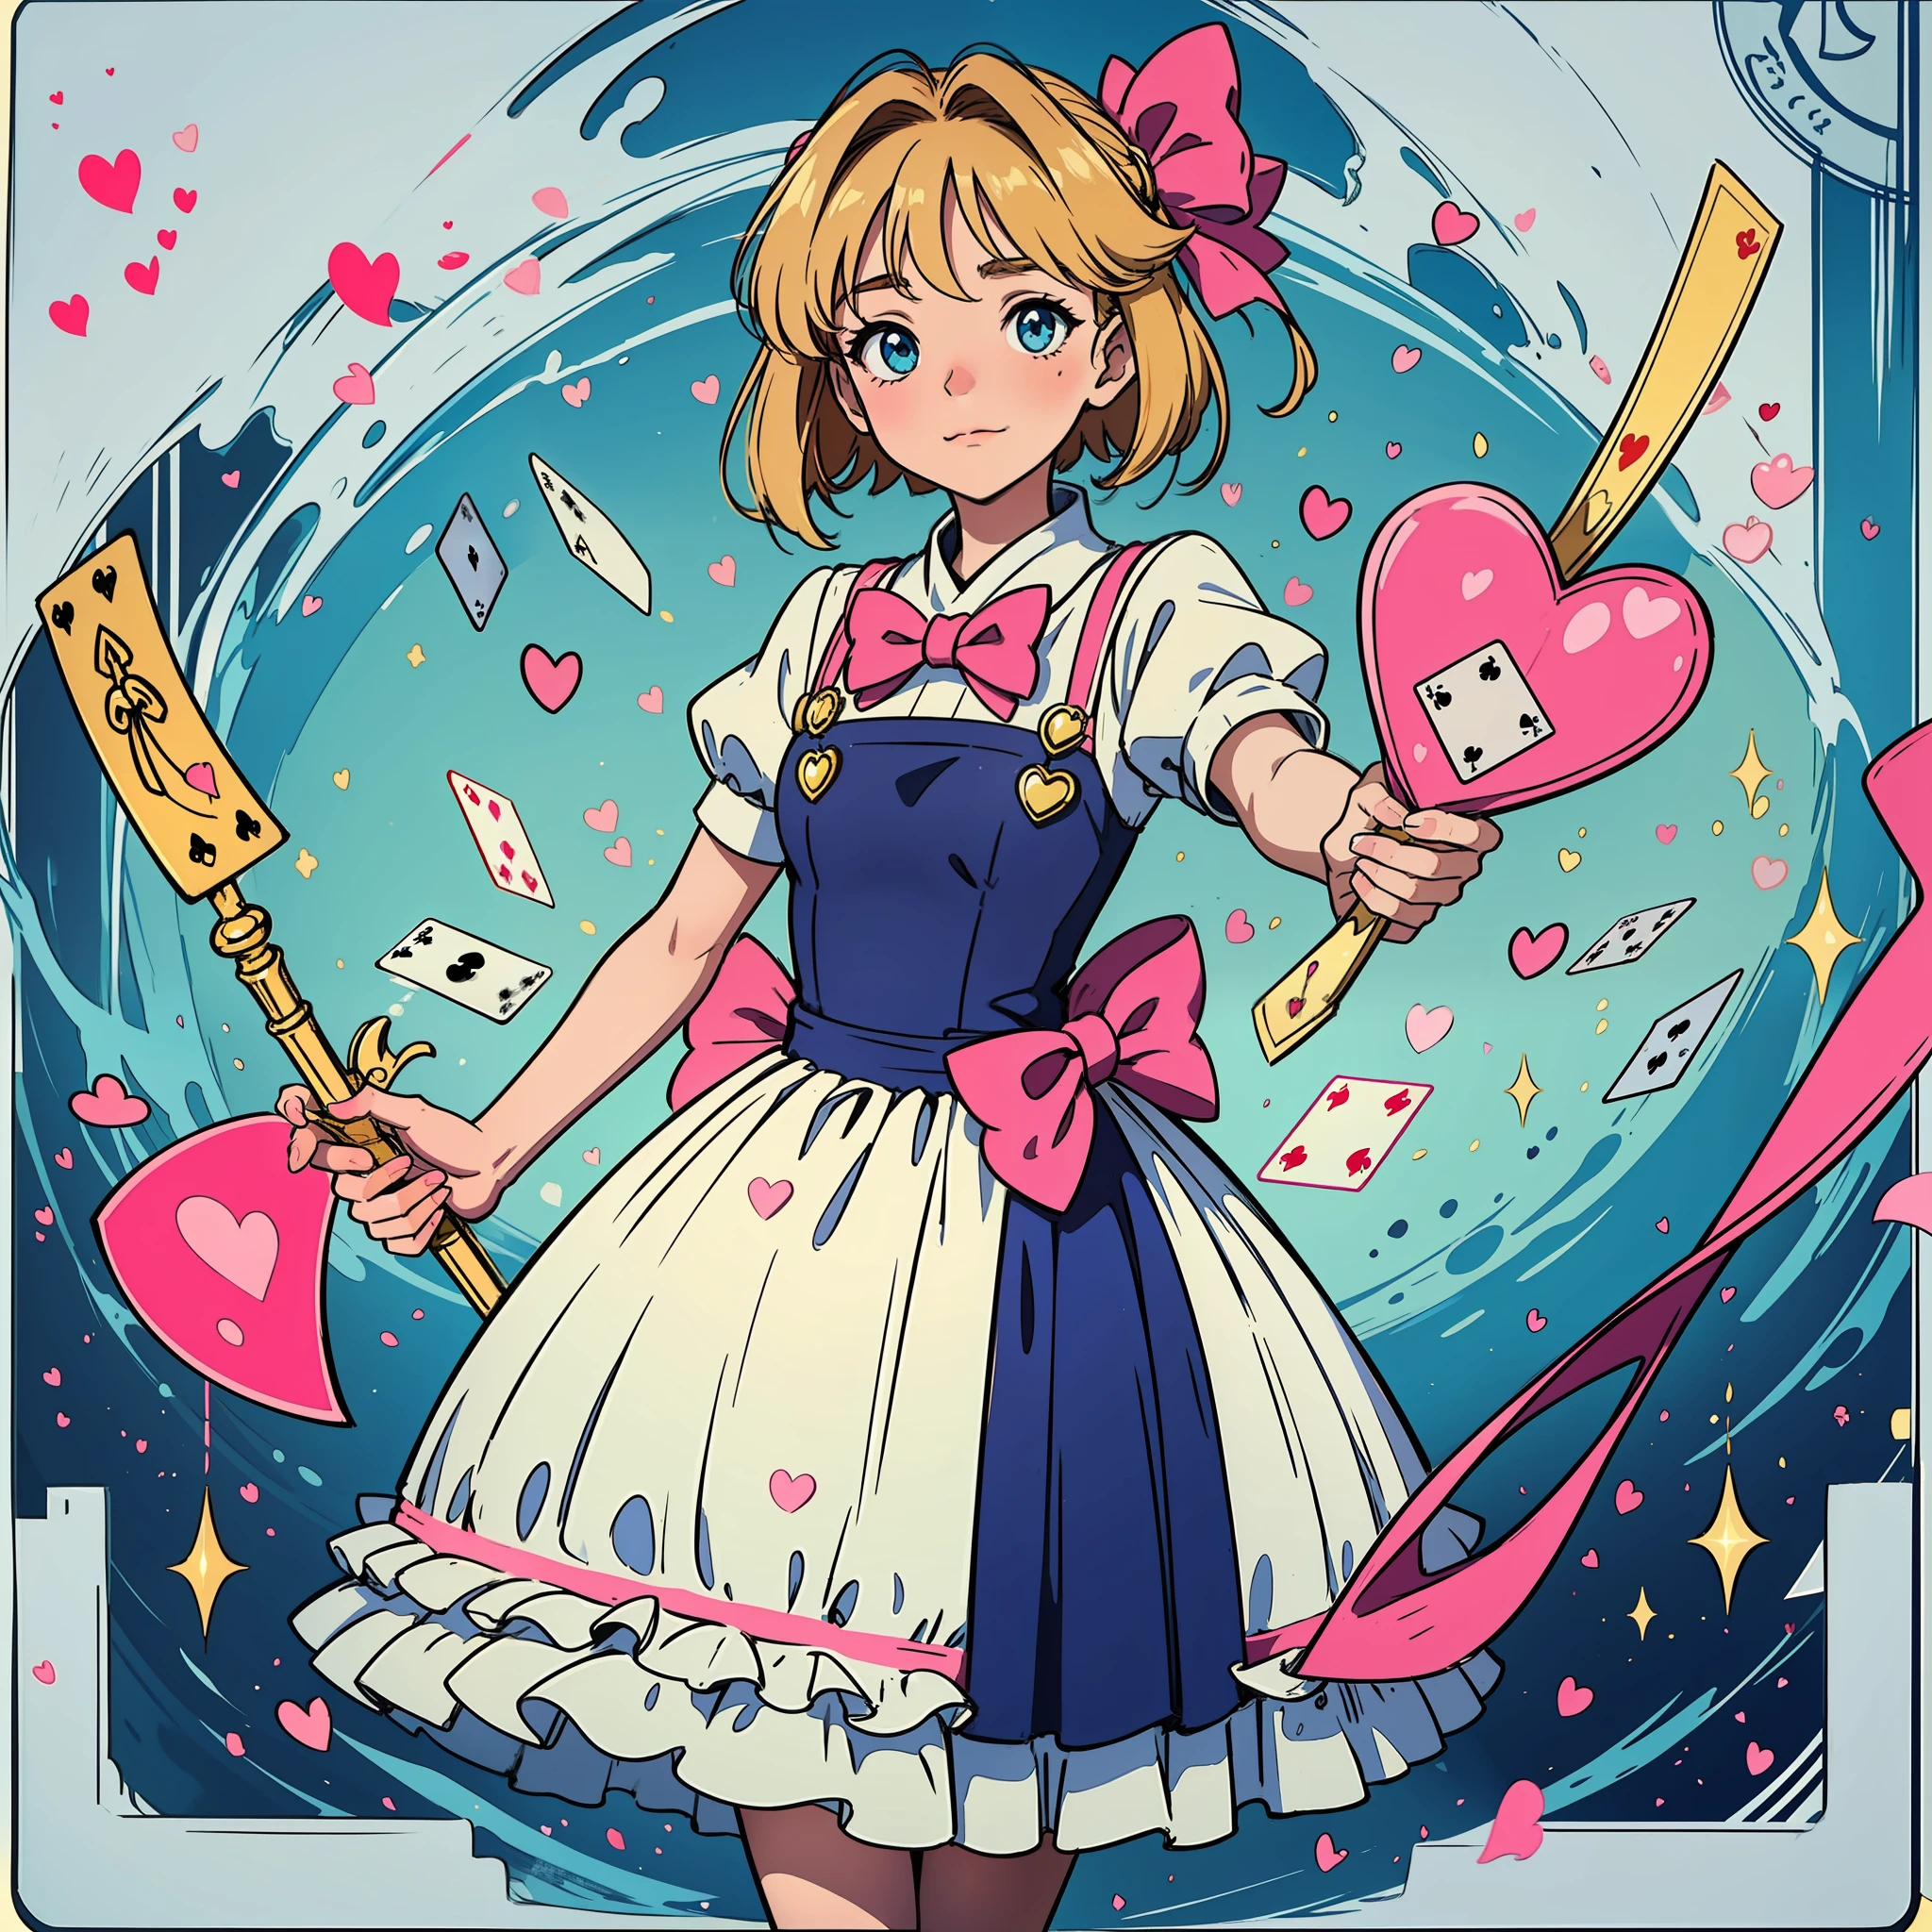 Sakura card captor,holding a pink heart-shaped crosier,background several golden colored playing cards,wearing blue tulle dress,with bows and ruffles in shades of white,anime style 90's,inspired studio Clamp